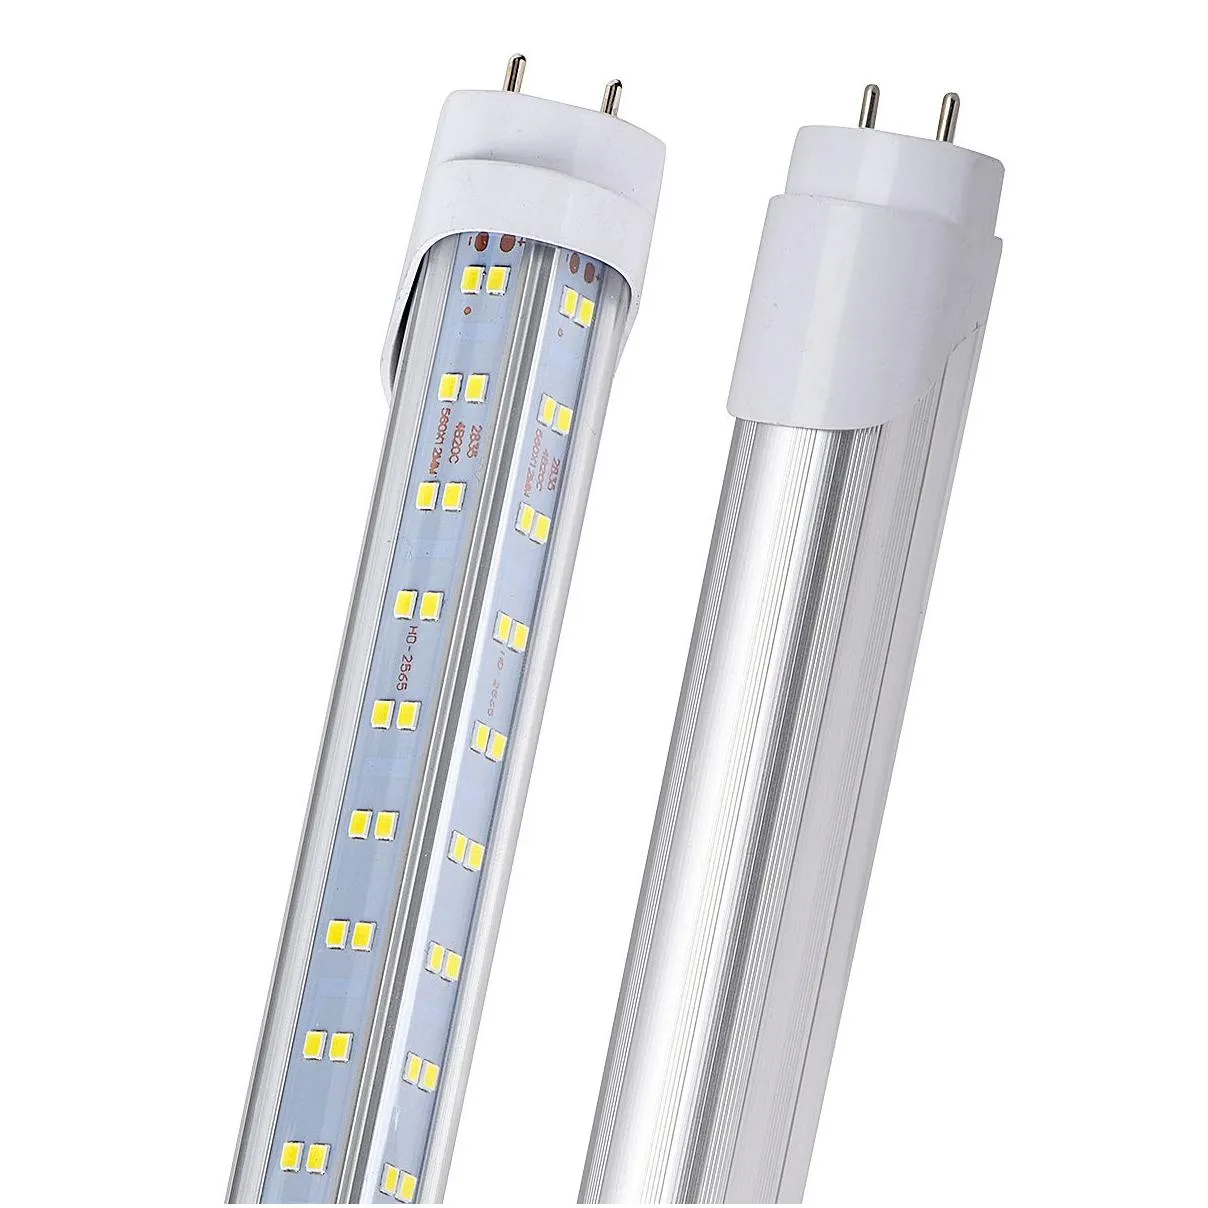 25pcs-t8 led light tubes 4ft 60w led bulbs light v shaped double side 4 rows t10 t12 led replacement bulbs for 4 foot fluorescent